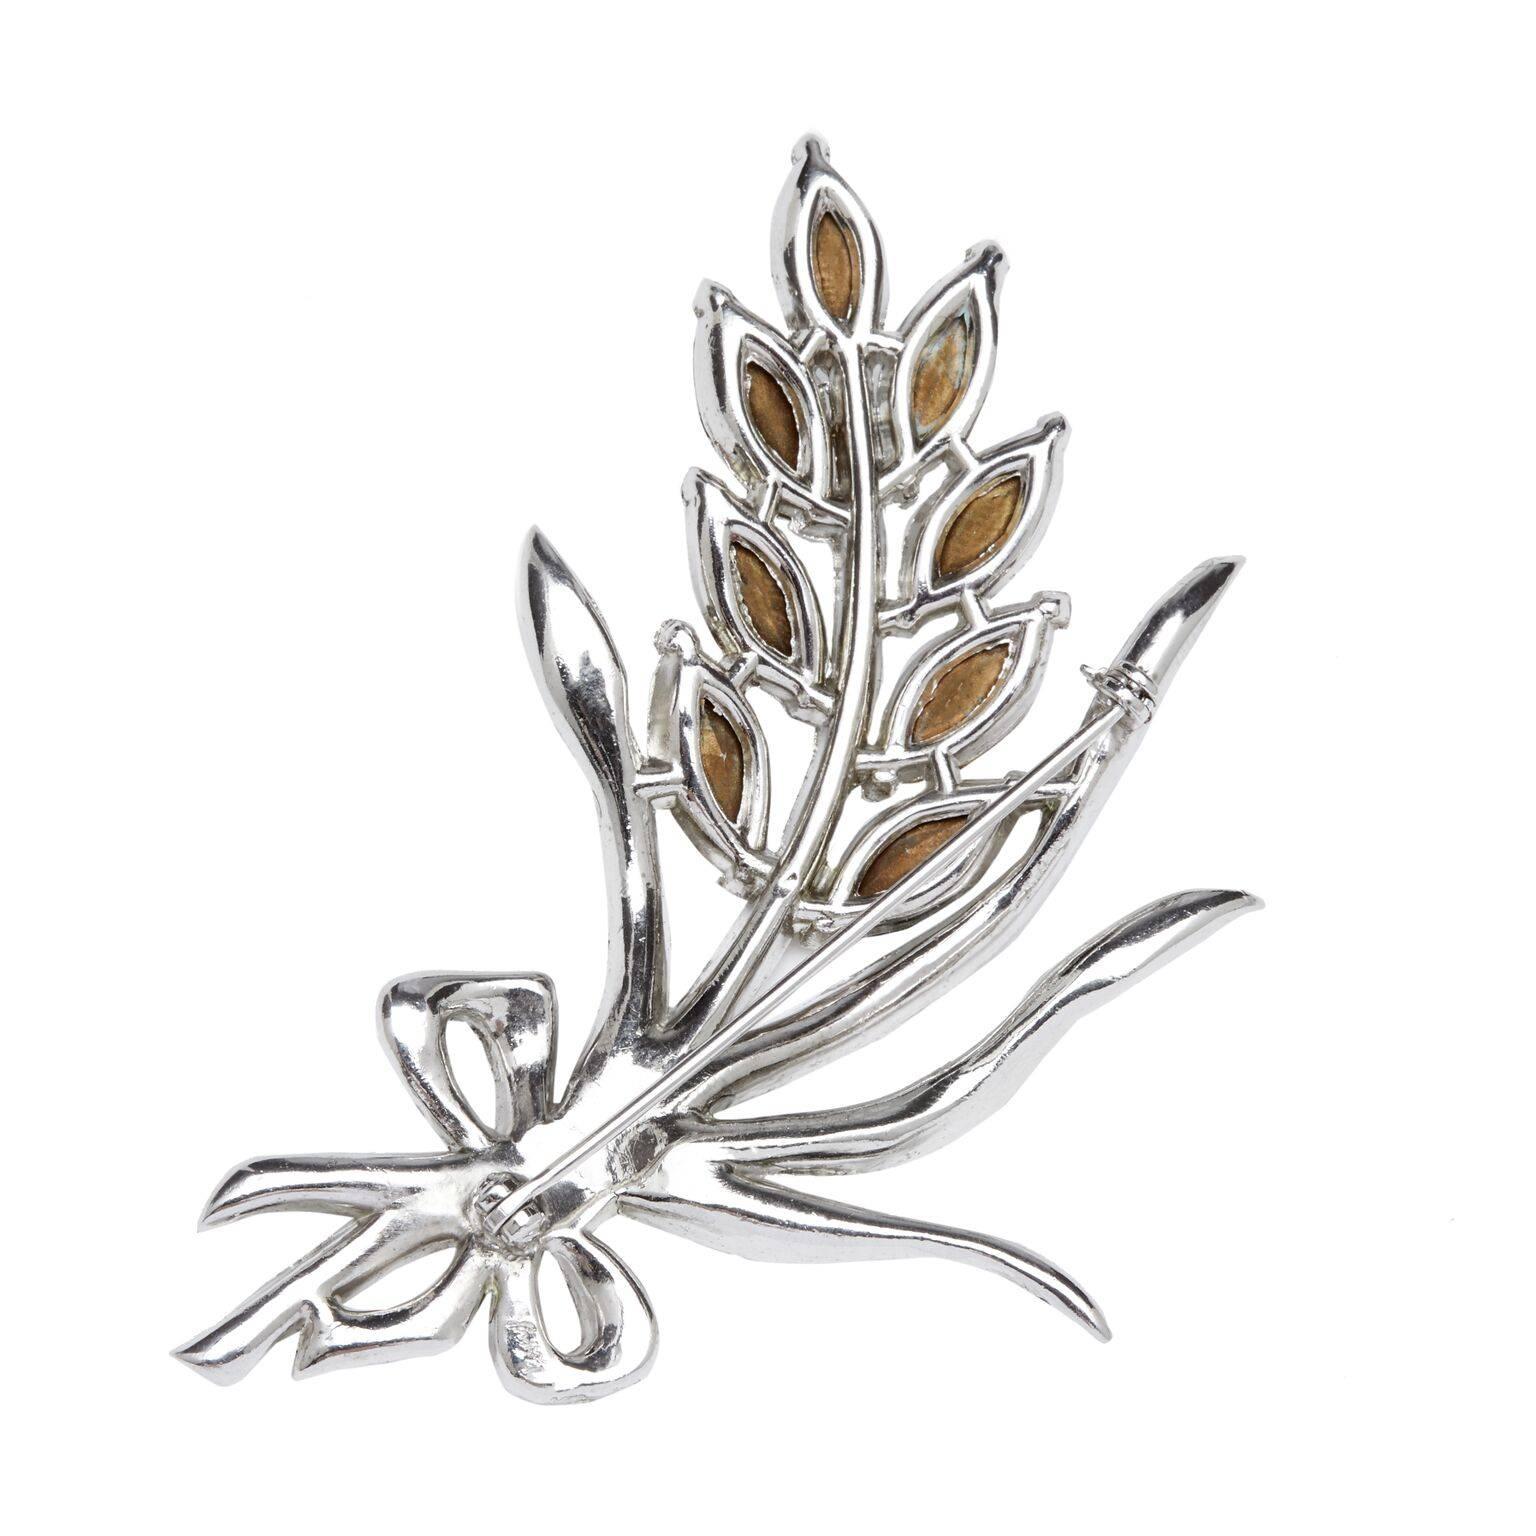 This exquisite 1940s rhodium plated flower spray broach with prong set rhinestones is manufactured by the high quality costume jewellery manufacturing giant Coro Inc.  Large marquise prong set rhinestones are arranged around a spray encrusted with